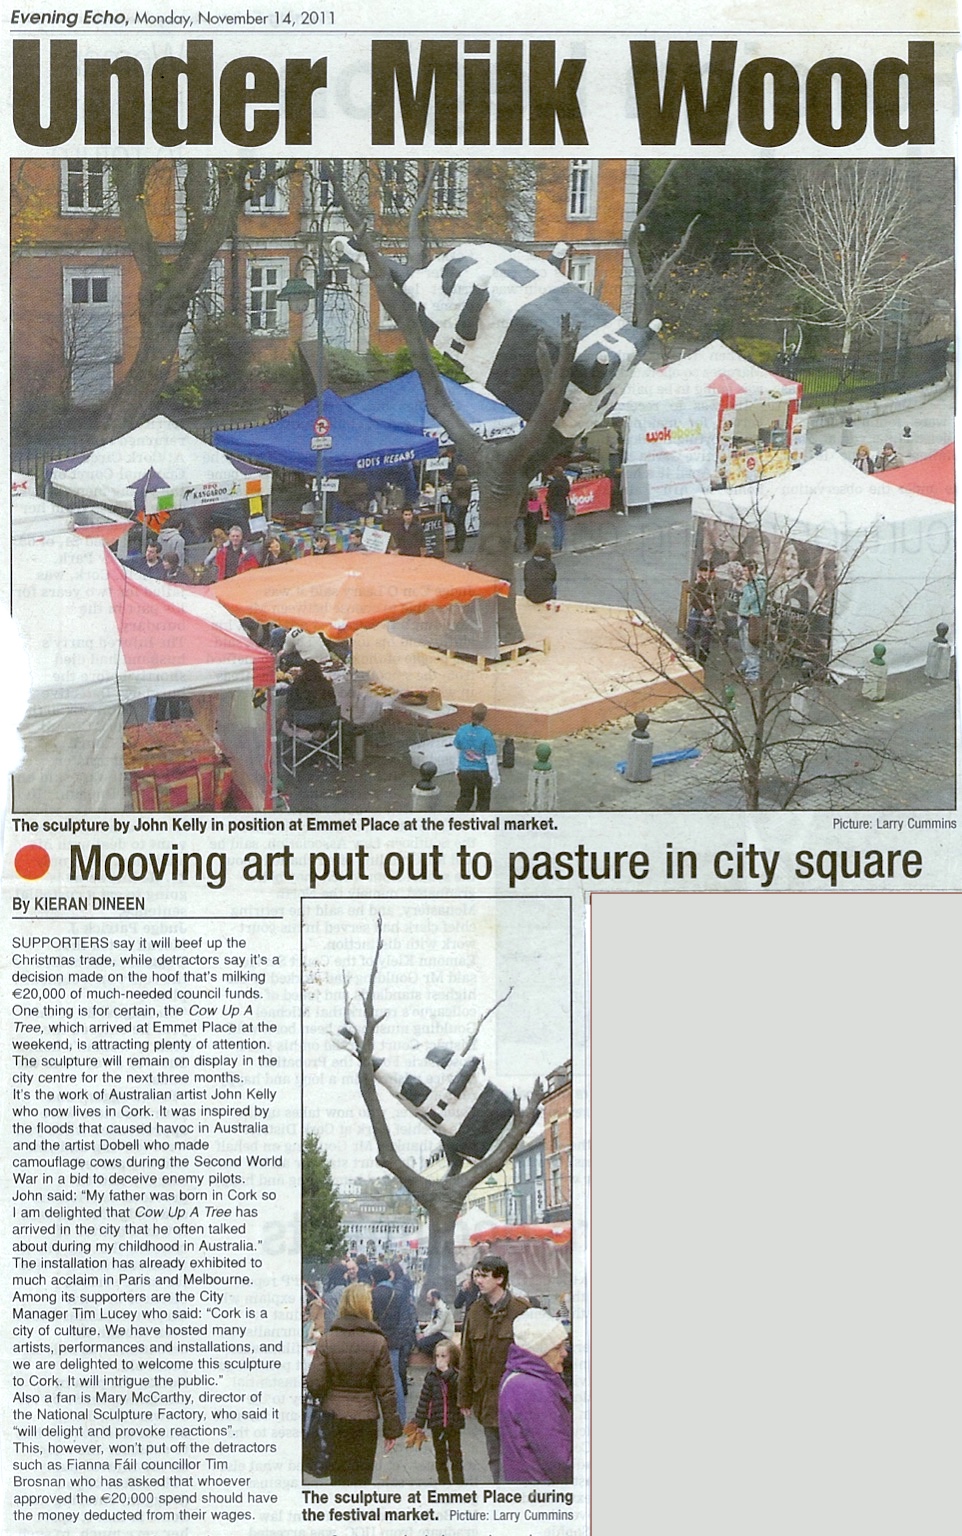 Kieran Dineen, ‘Under Milk Wood’, Evening Echo, 14 November 2011; newspaper article with two imags, the top, larger one showing Cow up a Tree in position outside the Crawford Art Gallery with stalls of various sorts around it; the second shows people milling about near the sculpture